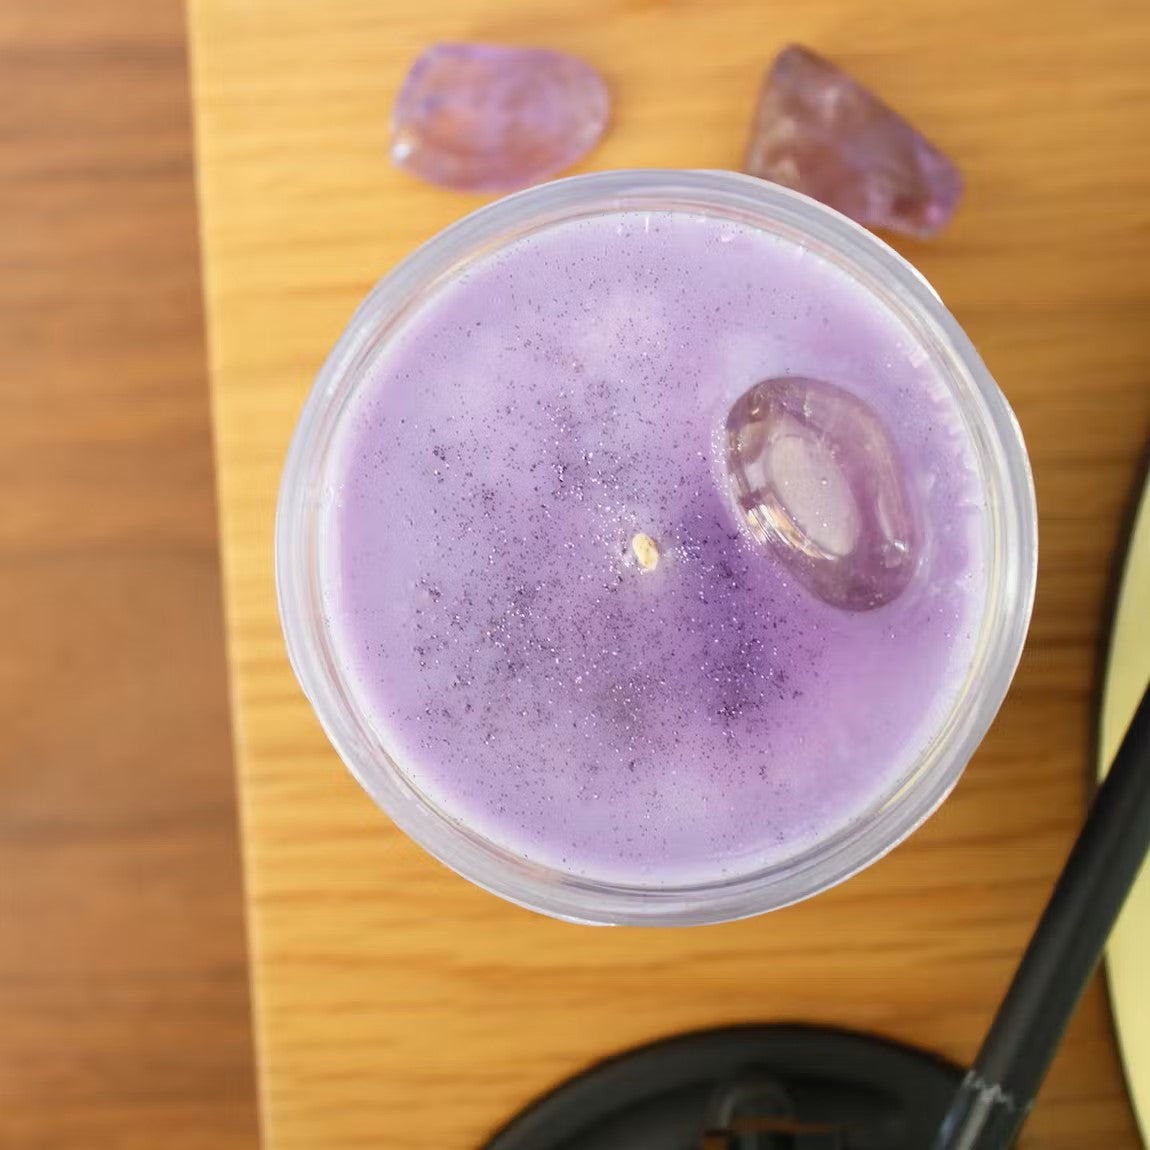 Lithotherapy candle | Beats the Boobs | Amethyst “letting go”